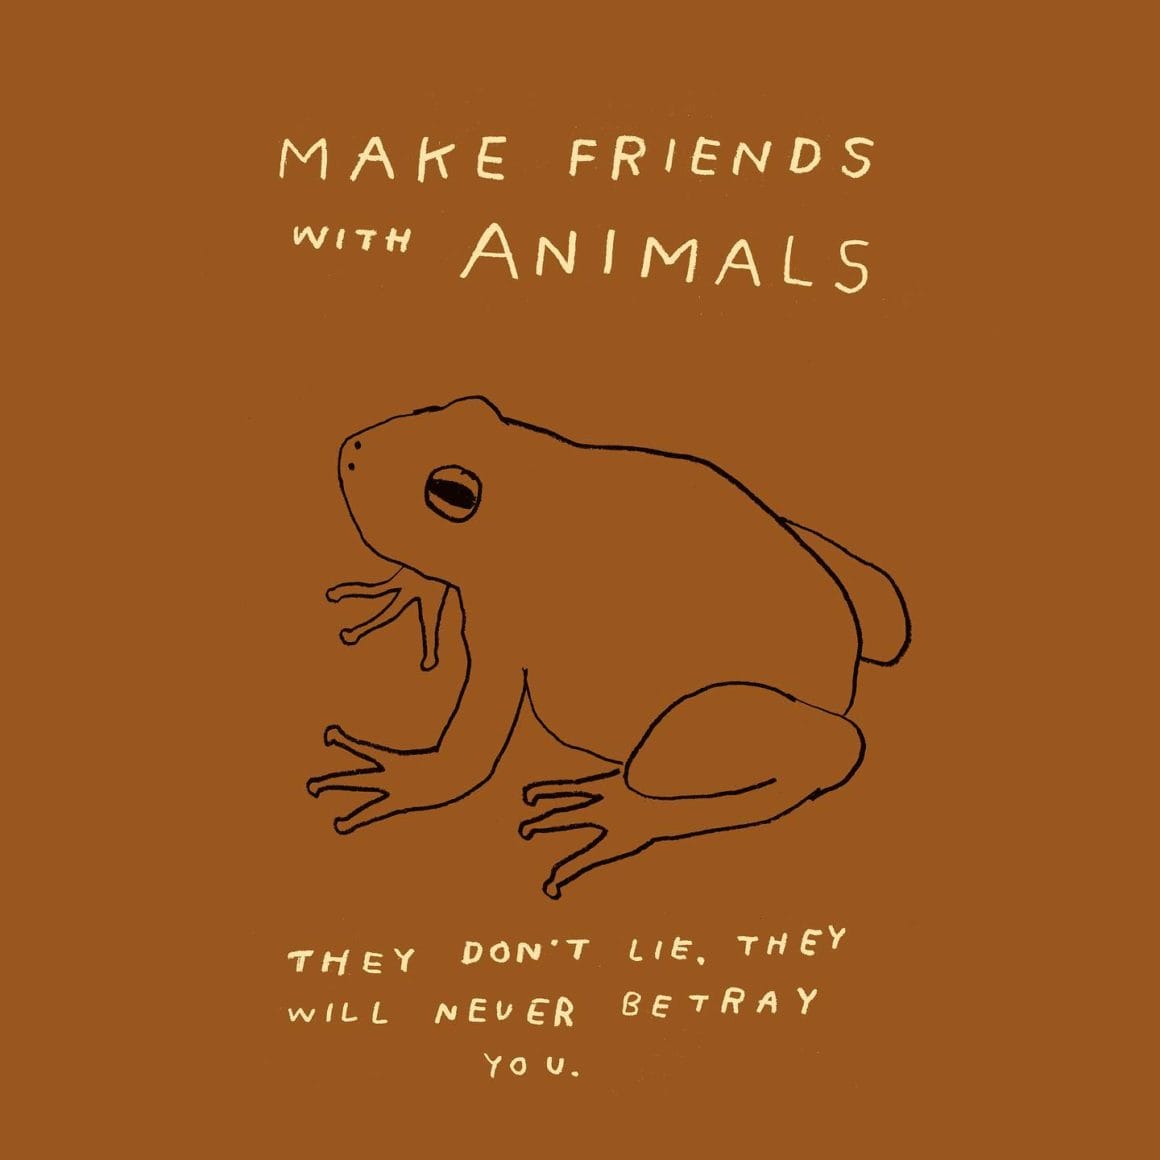 Dessin d'une grenouille sur un fond marron. On peut y lire "Make friends with animals. They don't lie. They will never betray"